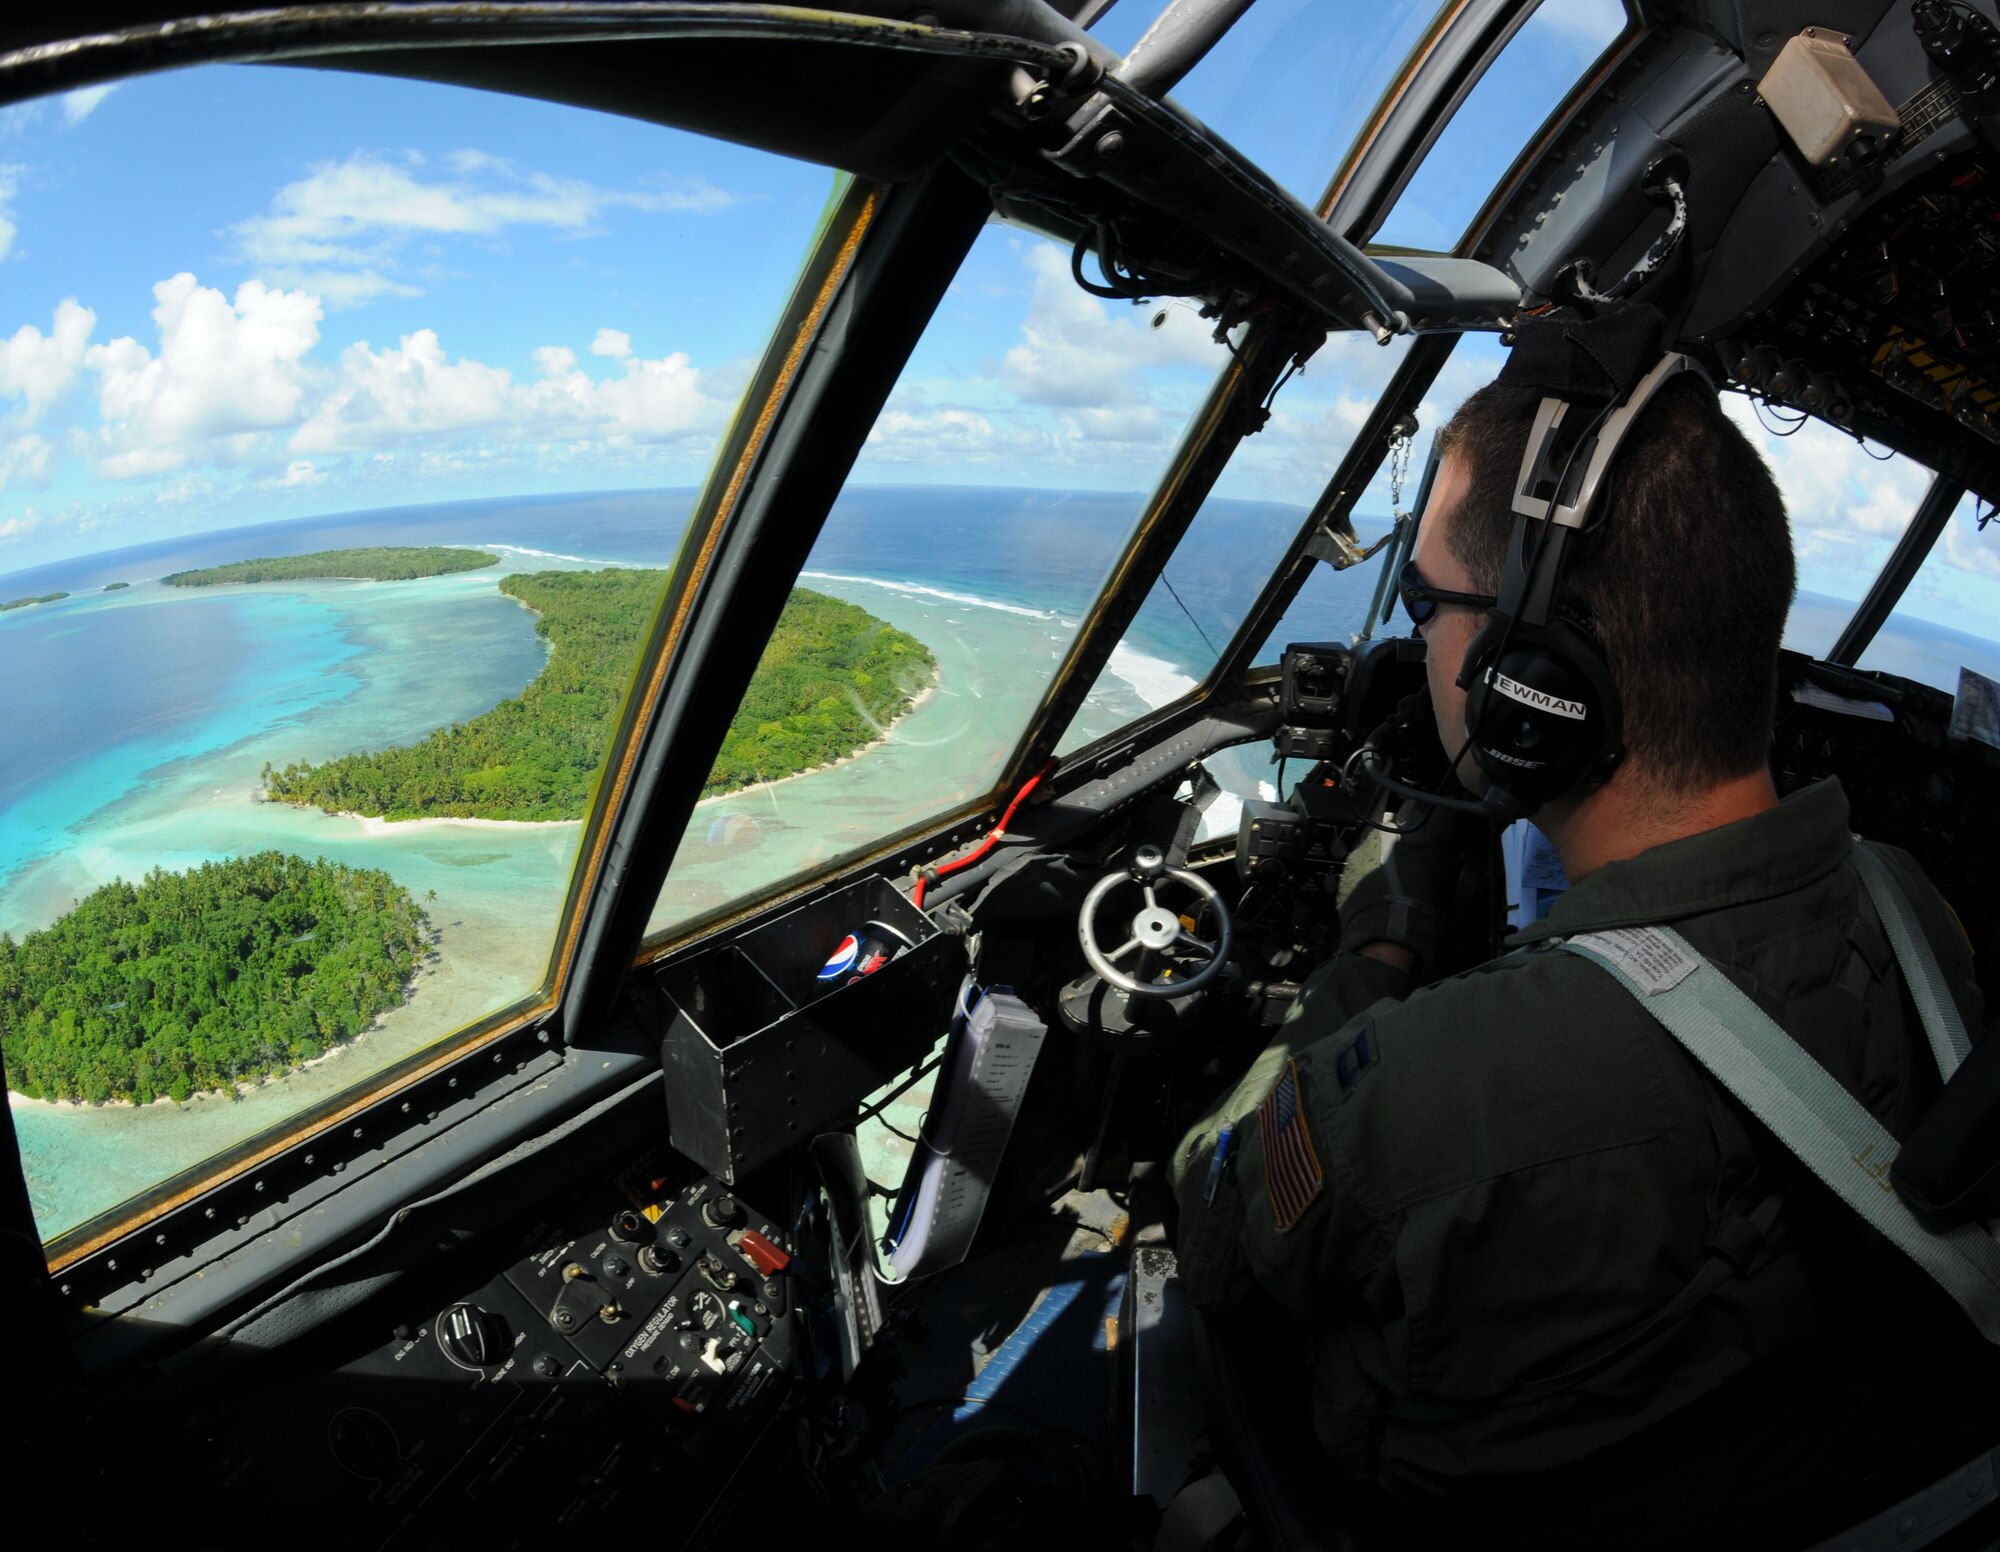 Capt. Phillip Newman, a 36th Airlift Squadron C-130 Hercules pilot from Yokota Air Base, Japan, looks out upon the Yap Islands during Operation Christmas Drop, Dec. 14. Airmen from the 36th Wing, Andersen Air Force Base, Guam and the 36th Airlift Squadron, Yokota Air Base, Japan, come together each year as a part of a training exercise to drop thousands of pounds of donated supplies over the Micronesian Islands. This year more than 60 boxes will be dropped to 55 Island weighing in at more than 20,000 pounds. (U.S. Air Force photo/ Senior Airman Nichelle Anderson) 